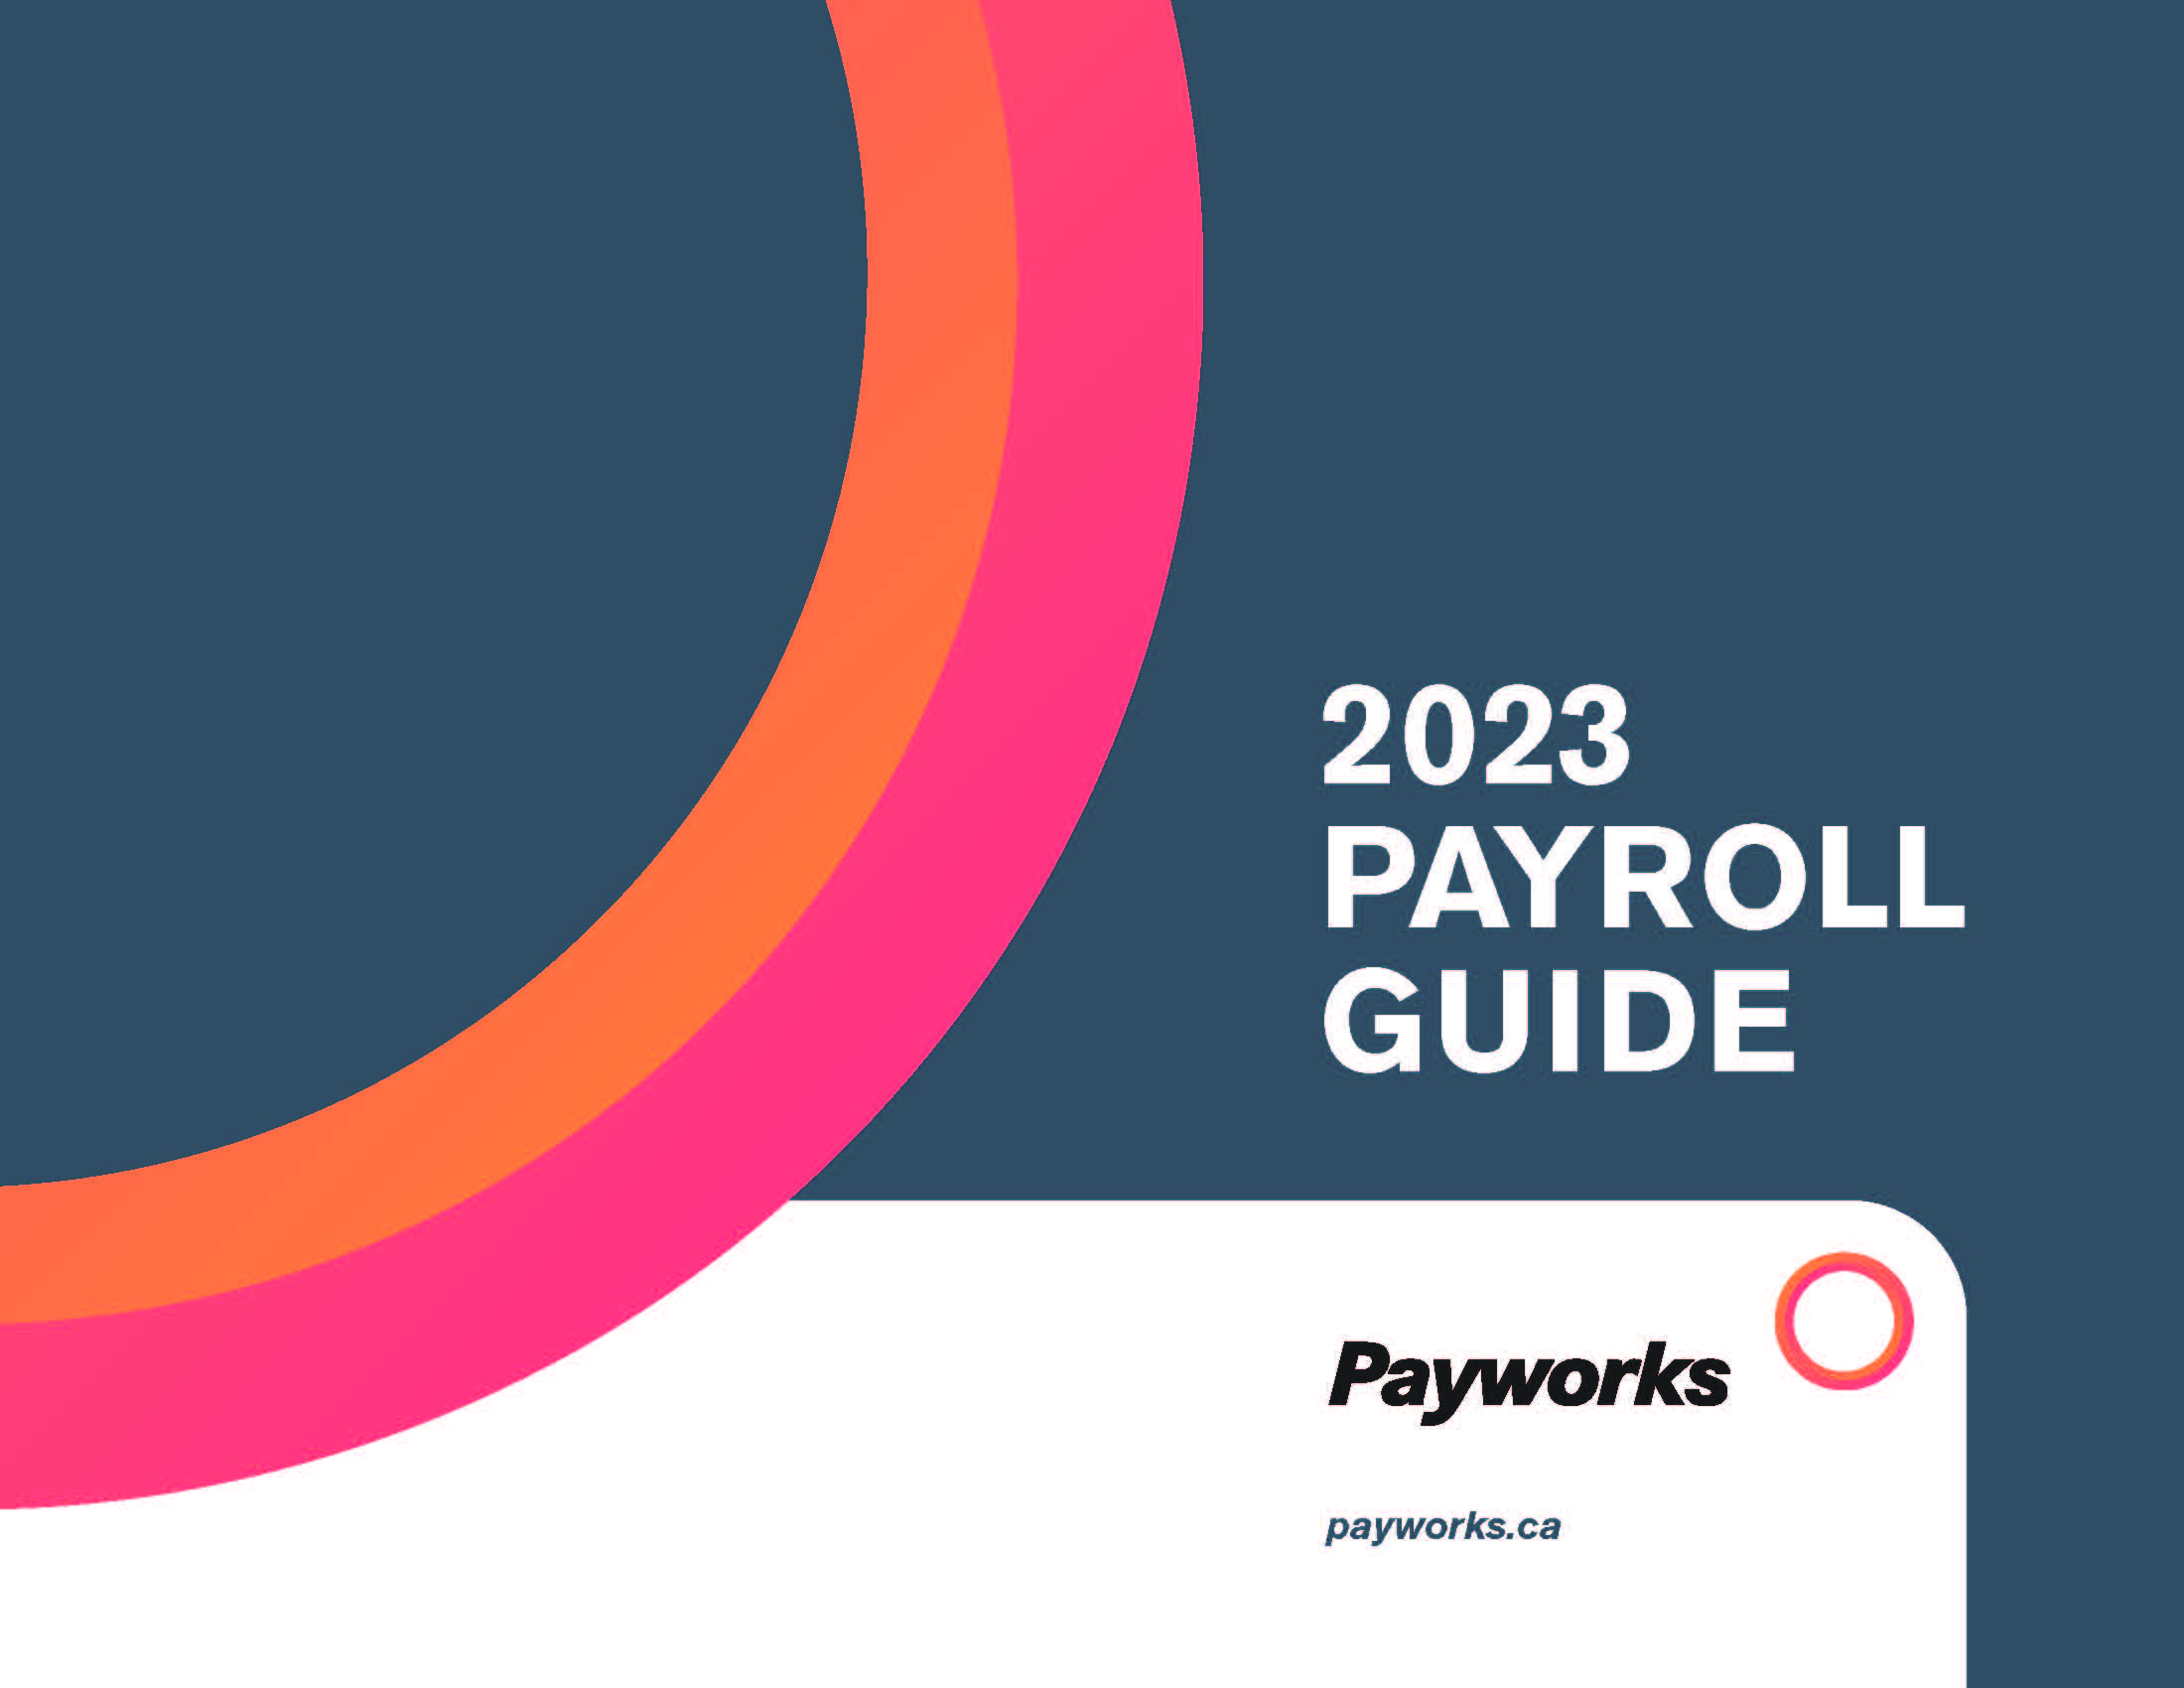 [Guide] 2023 Payroll Guide for Canadian Businesses by Payworks